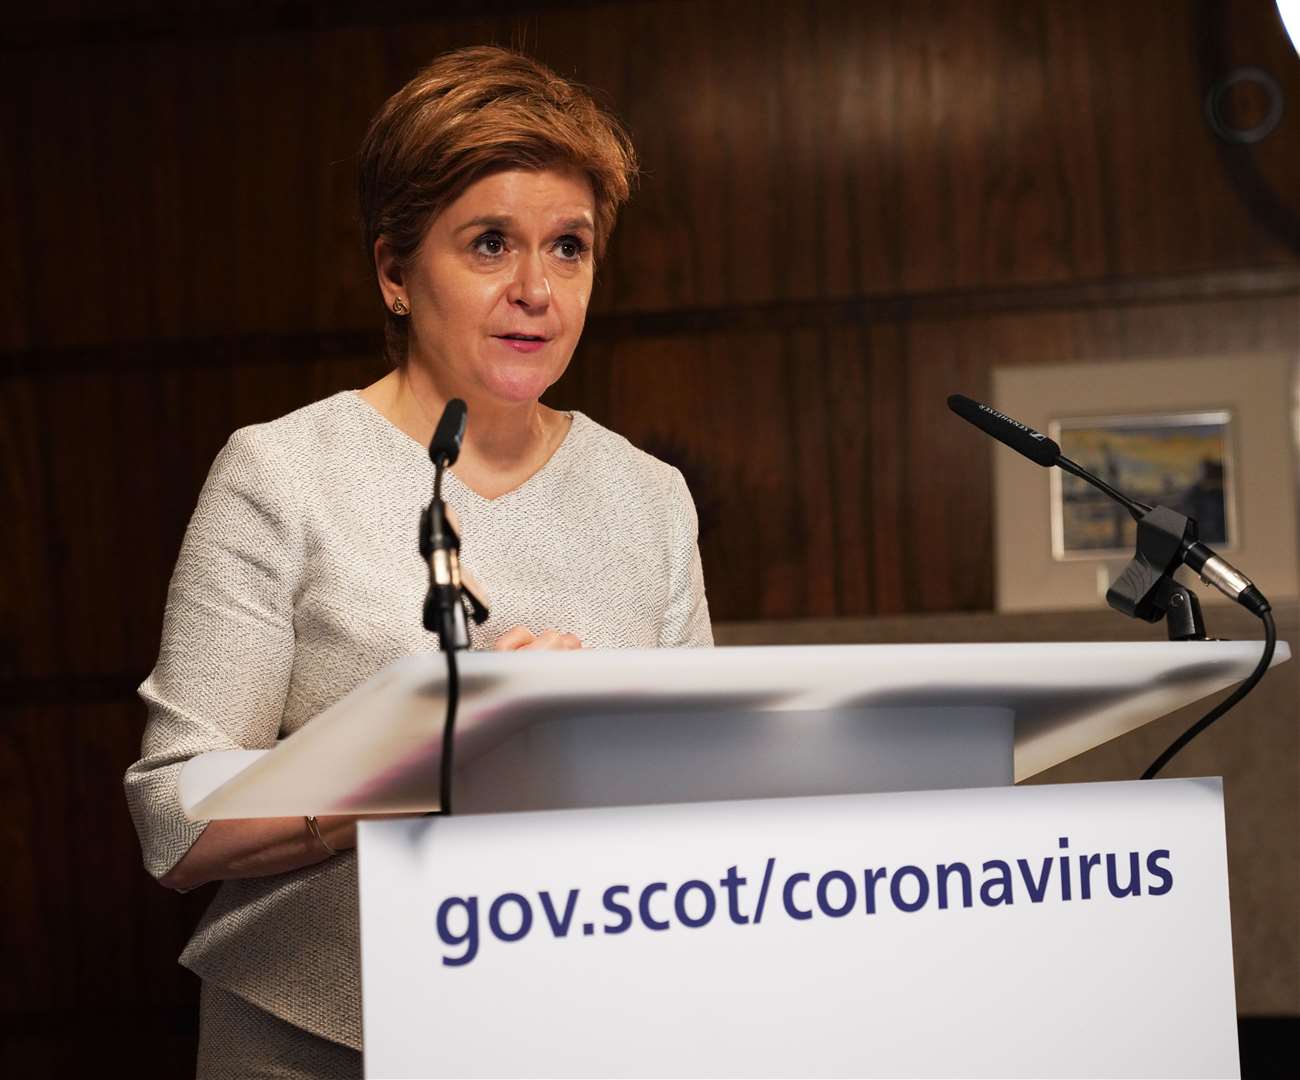 Nicola Sturgeon described the new framework as 'an important moment in our recovery'.